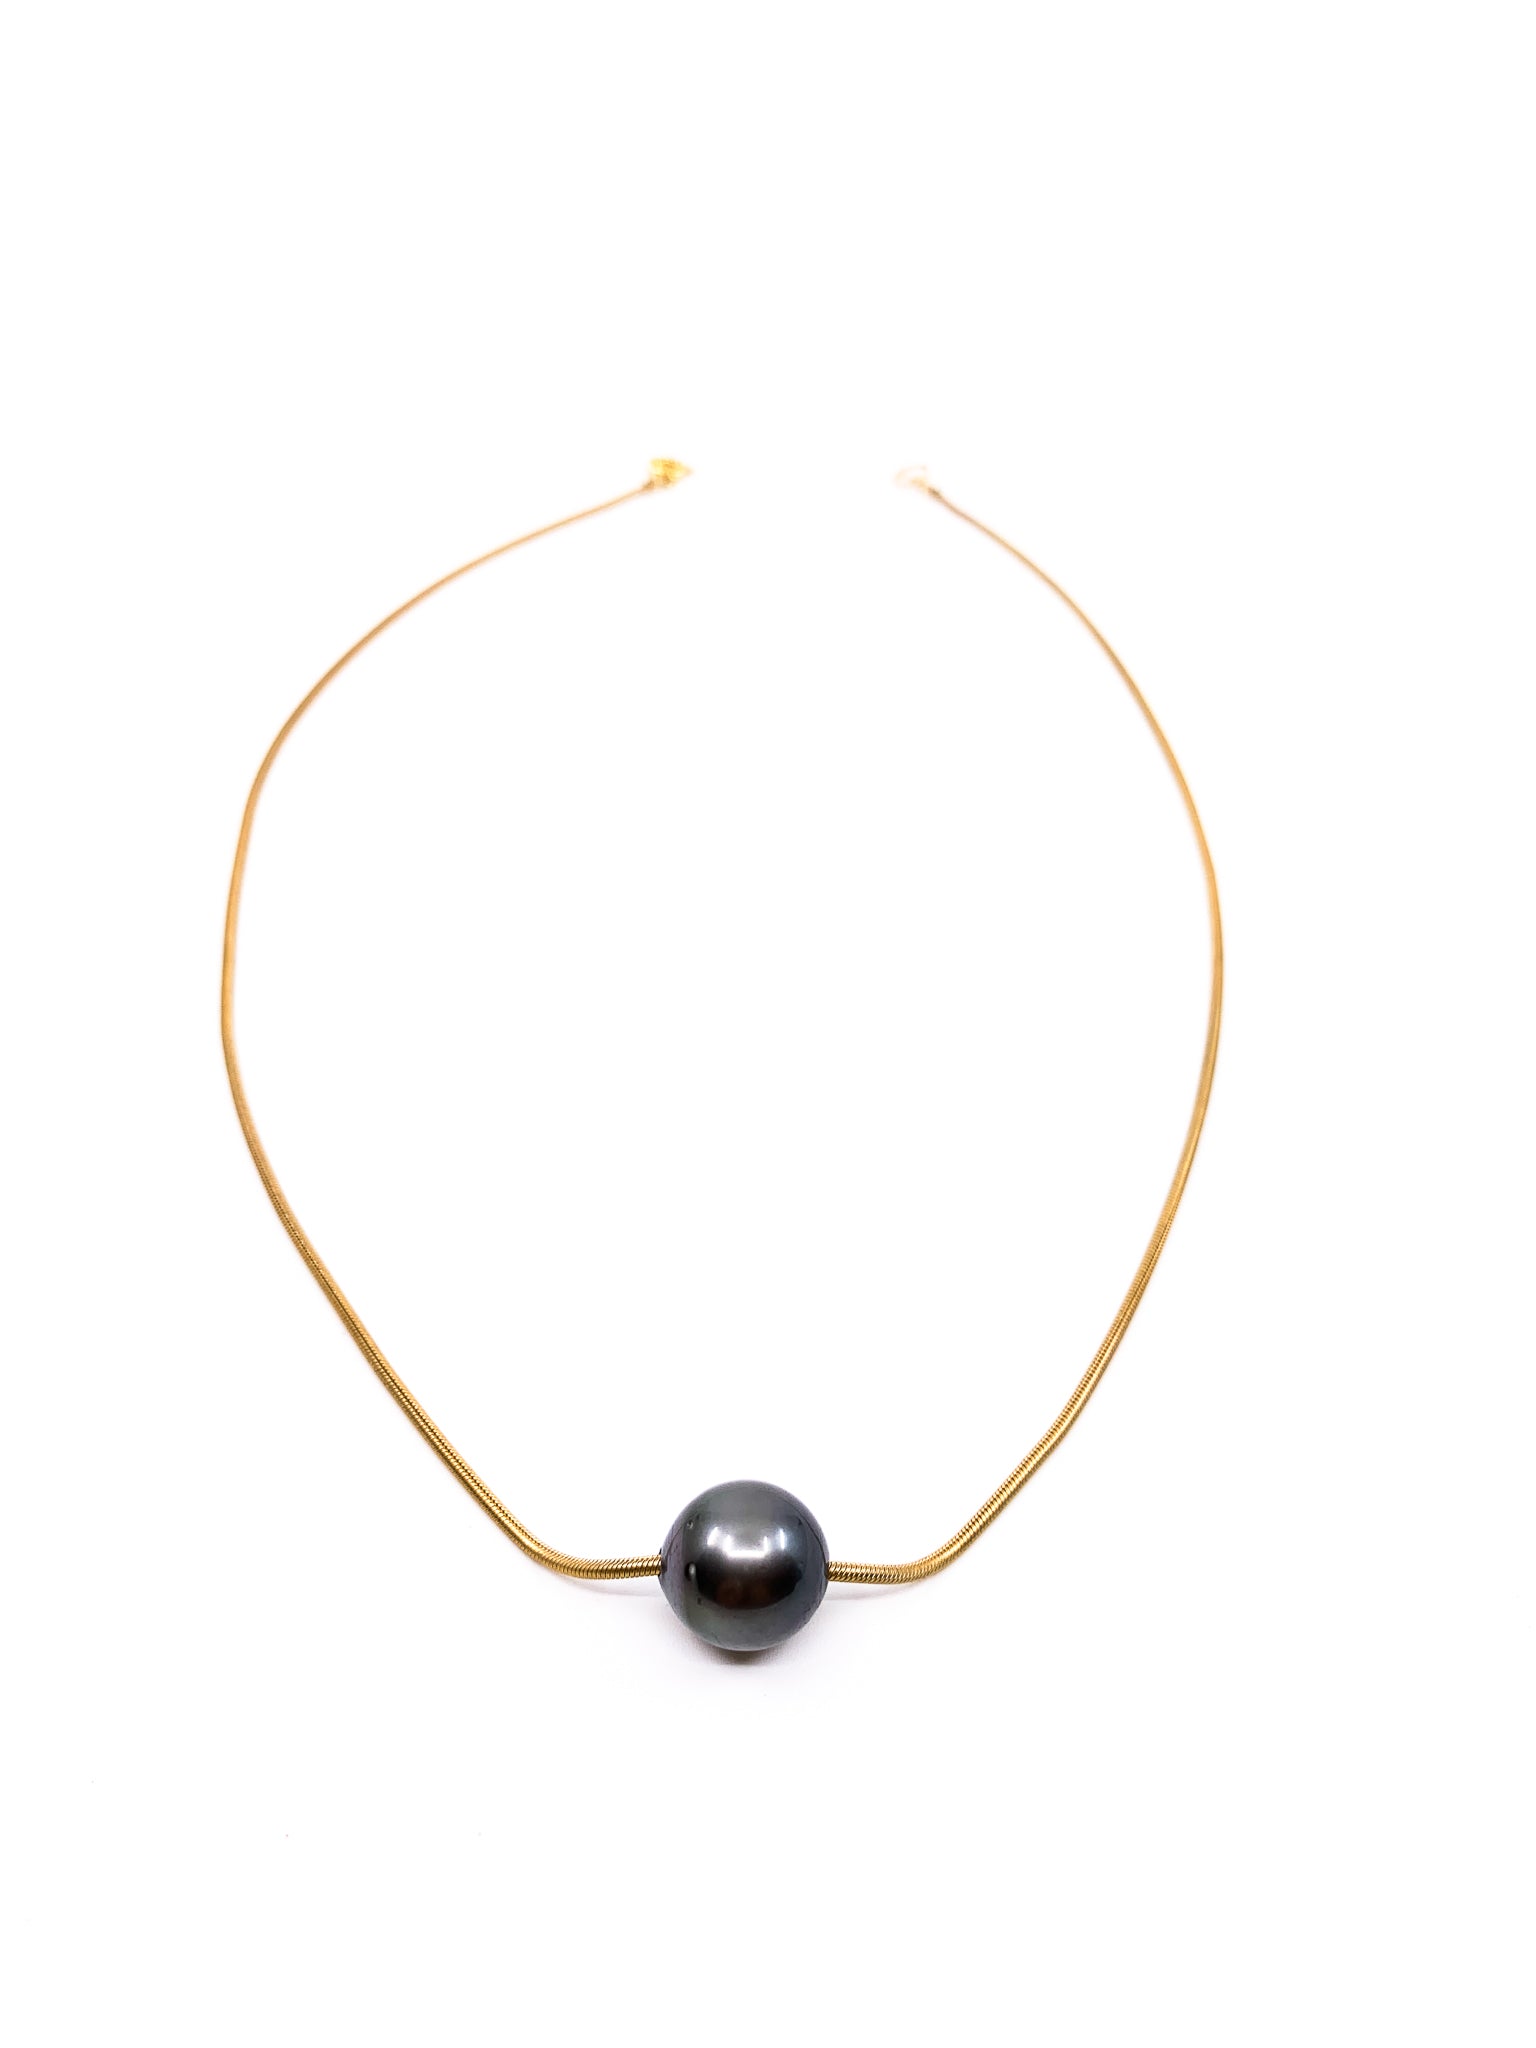 floating Tahitian pearl snake gold chain by eve black jewelry made in hawaii